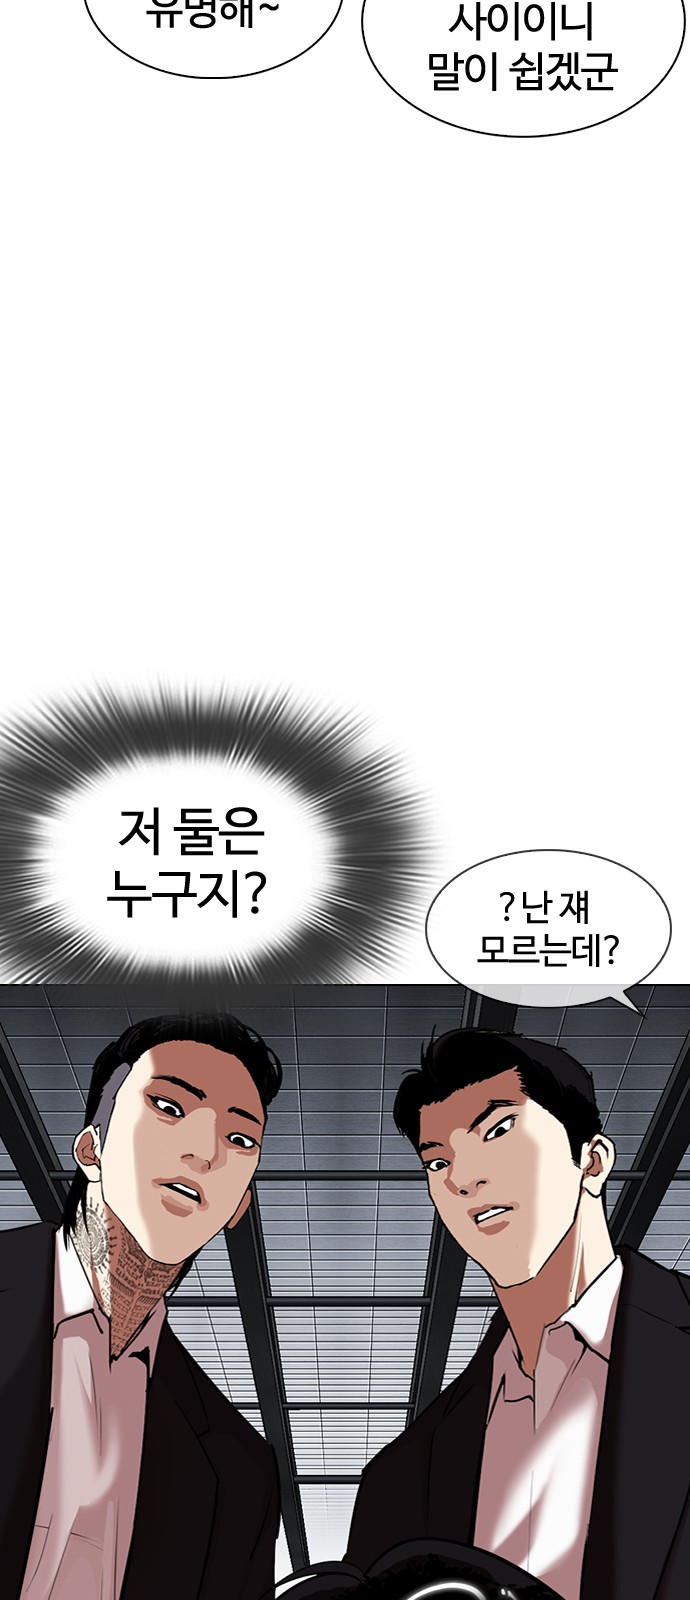 Lookism - Chapter 308 - Page 3